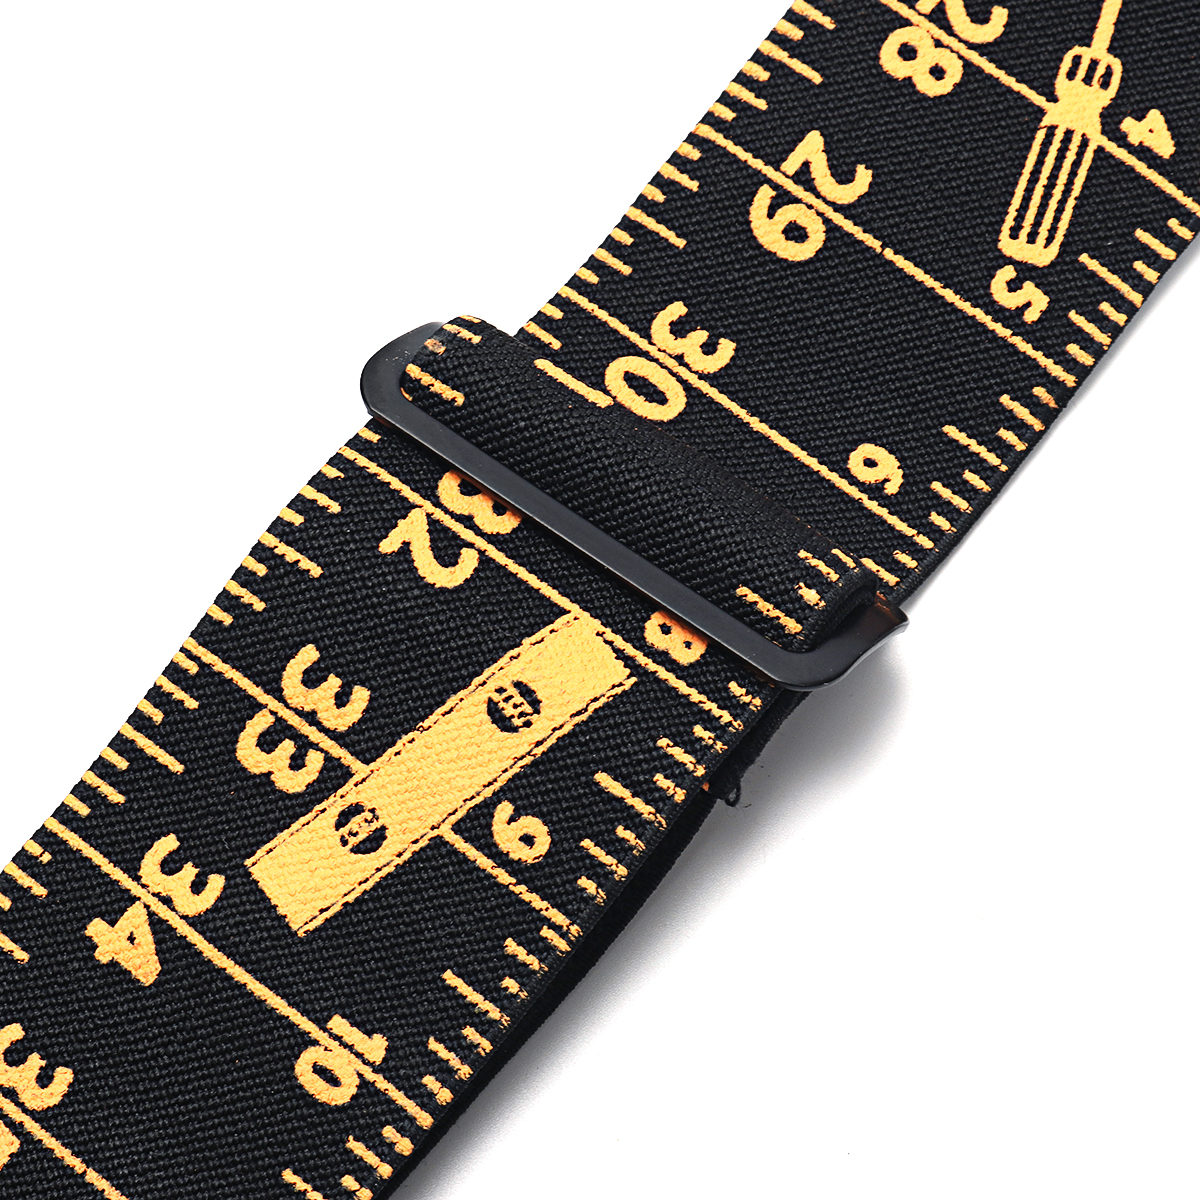 2inch-Wide-Adjustable-Ruler-Heavy-Duty-Belt-Tool-Braces-Suspender-for-Pouch-1570182-5